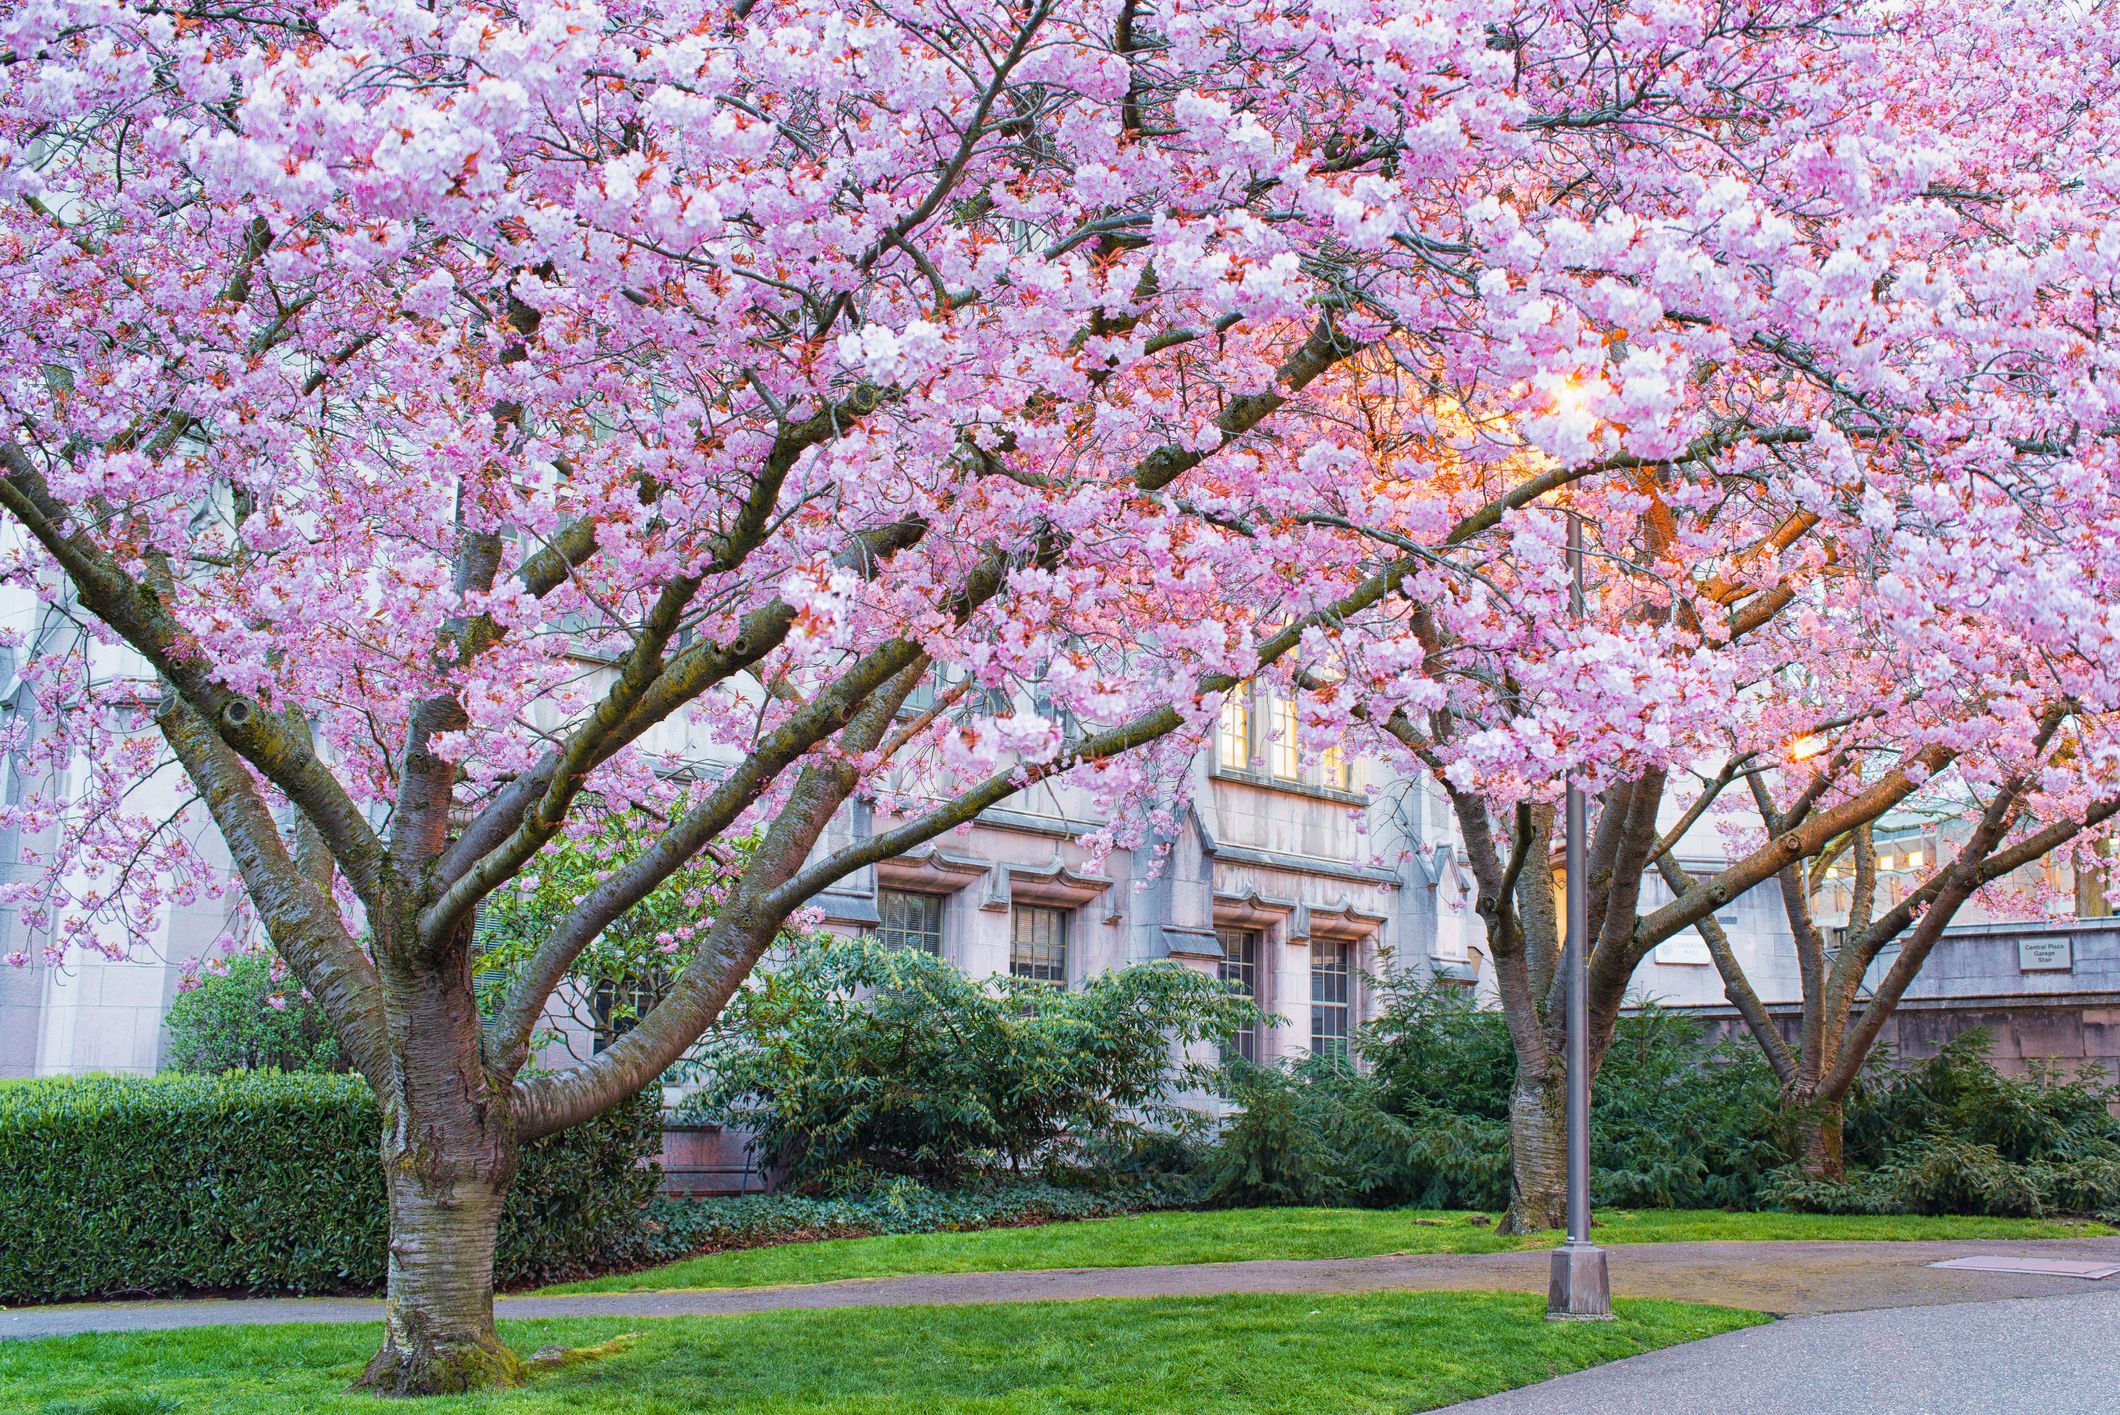 Big beautiful pink and white cherry flowers in spring outdoor